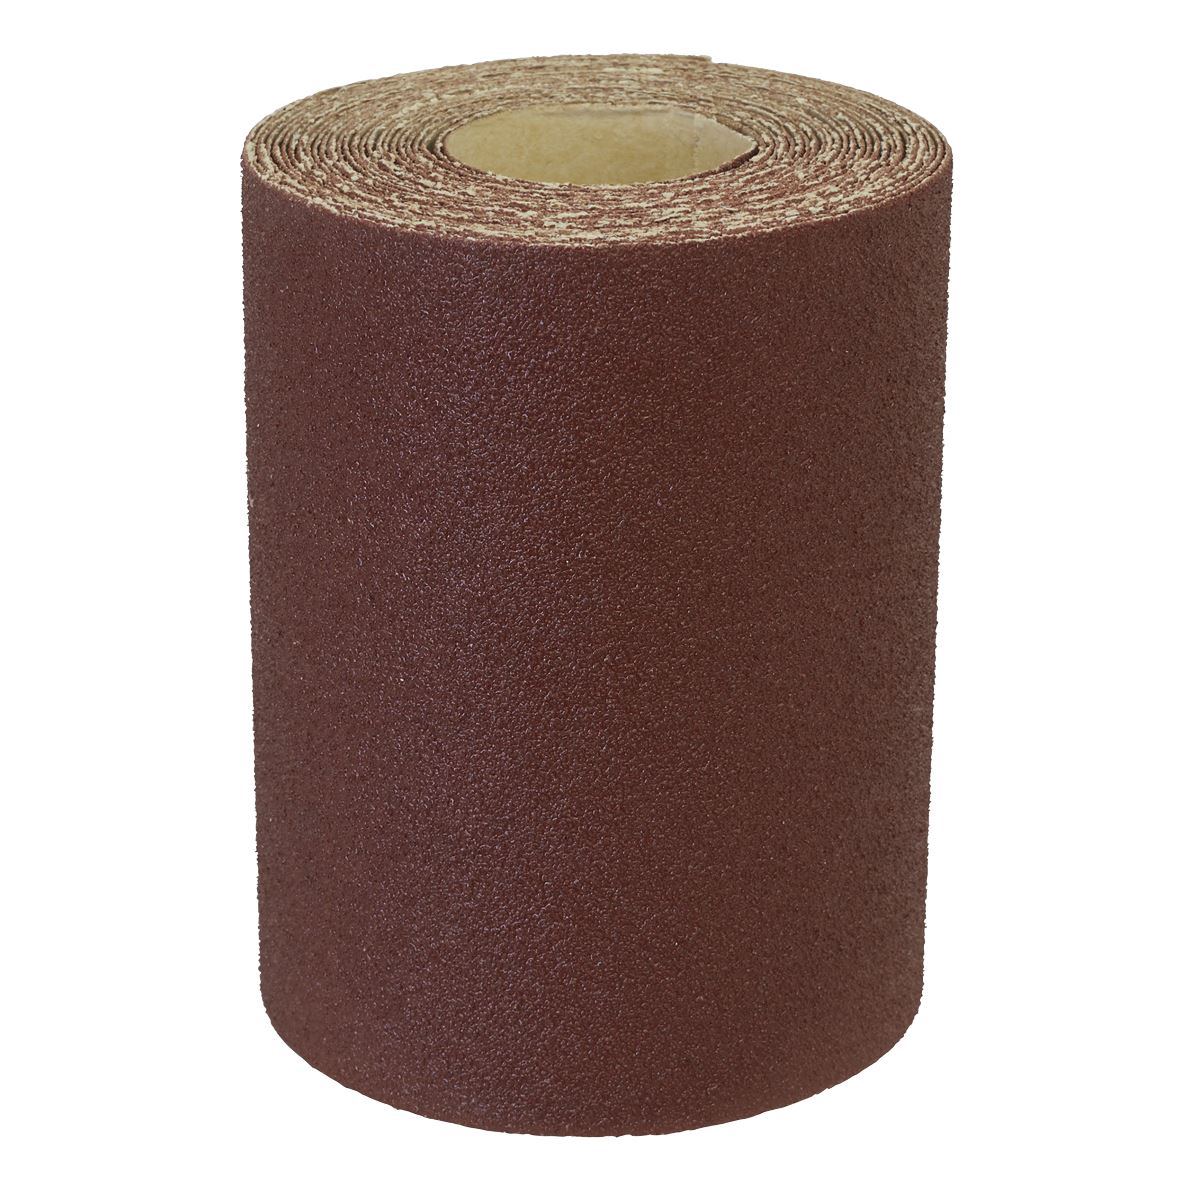 Worksafe by Sealey Production Sanding Roll 115mm x 5m - Coarse 60Grit